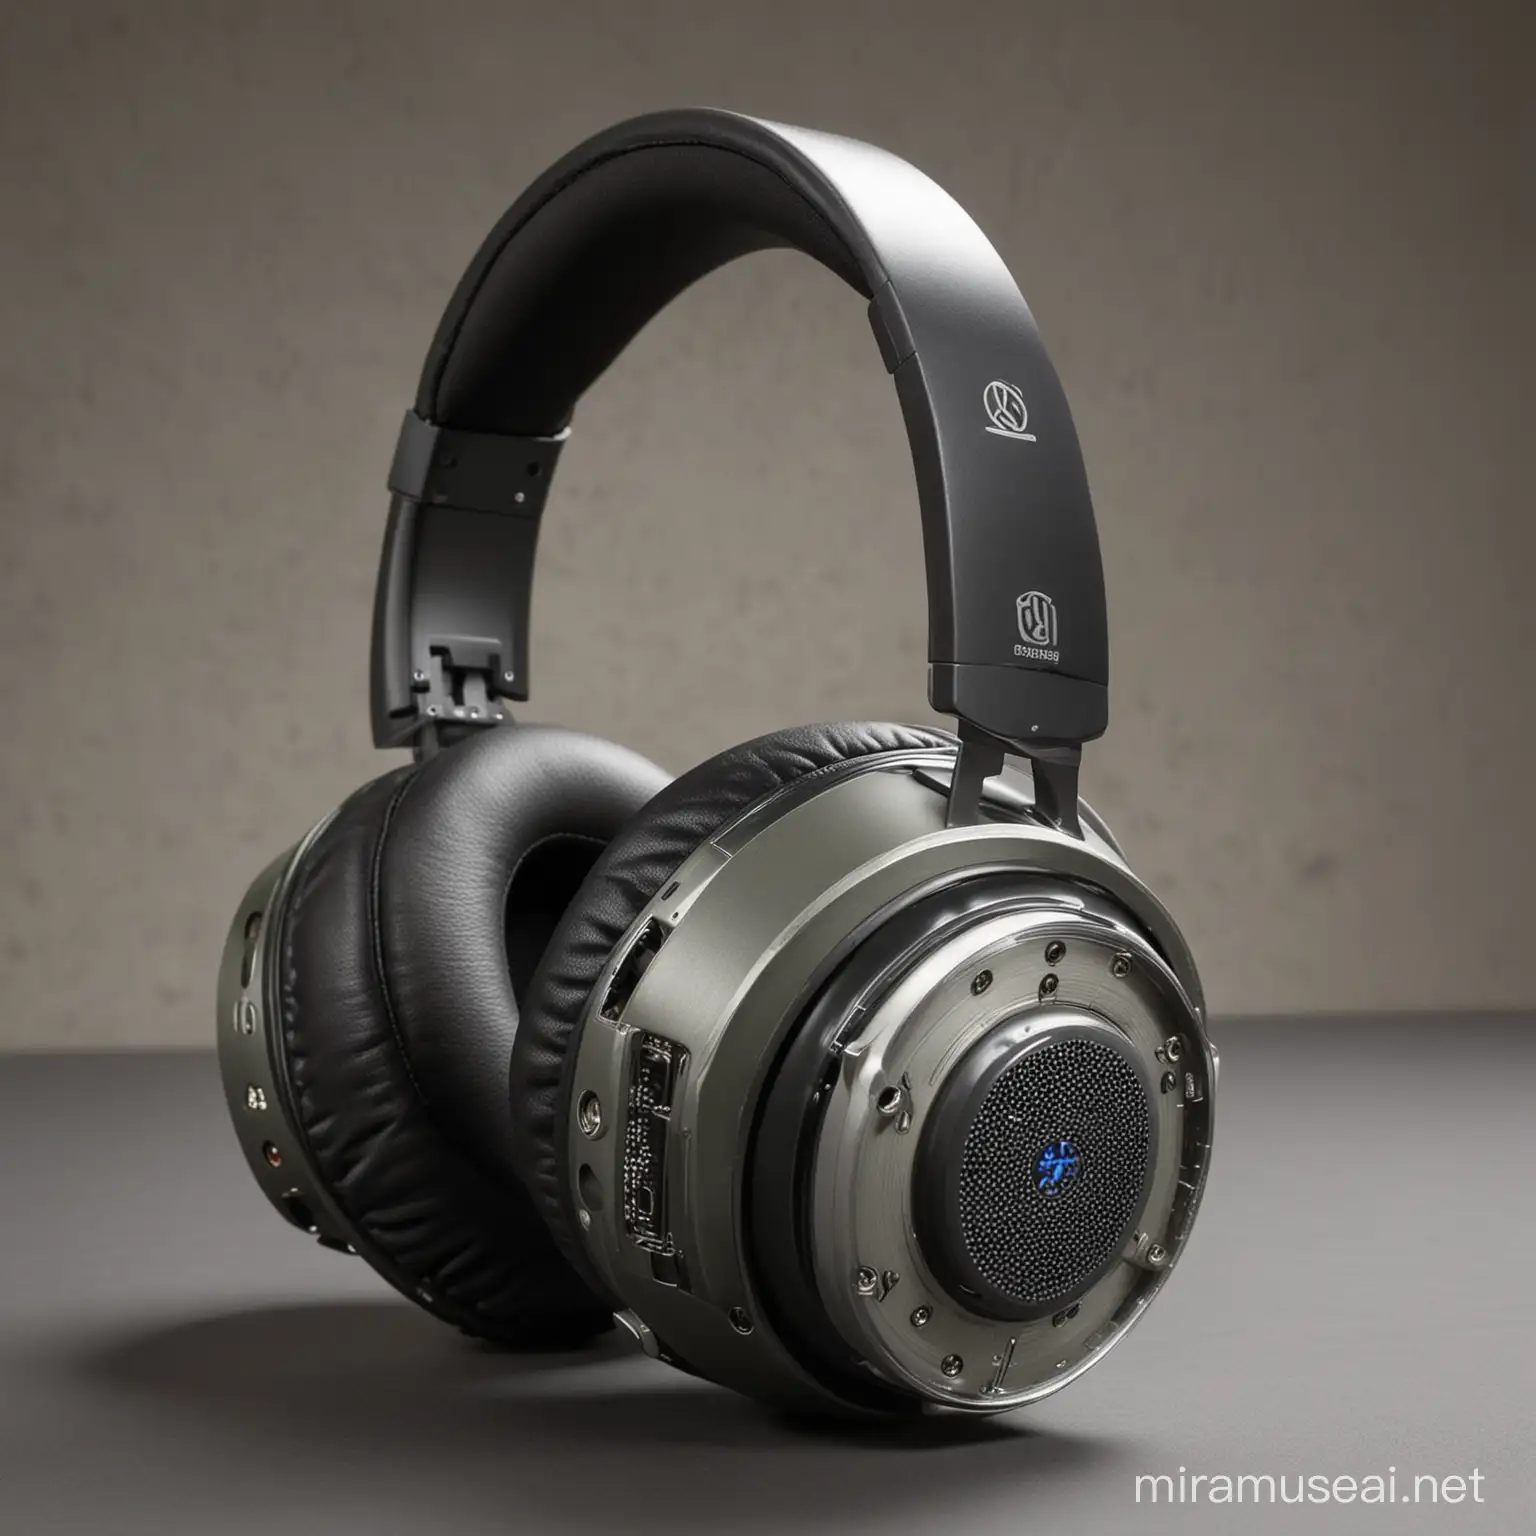 Bluetooth headphones powered by a nuclear reactor so it never runs out